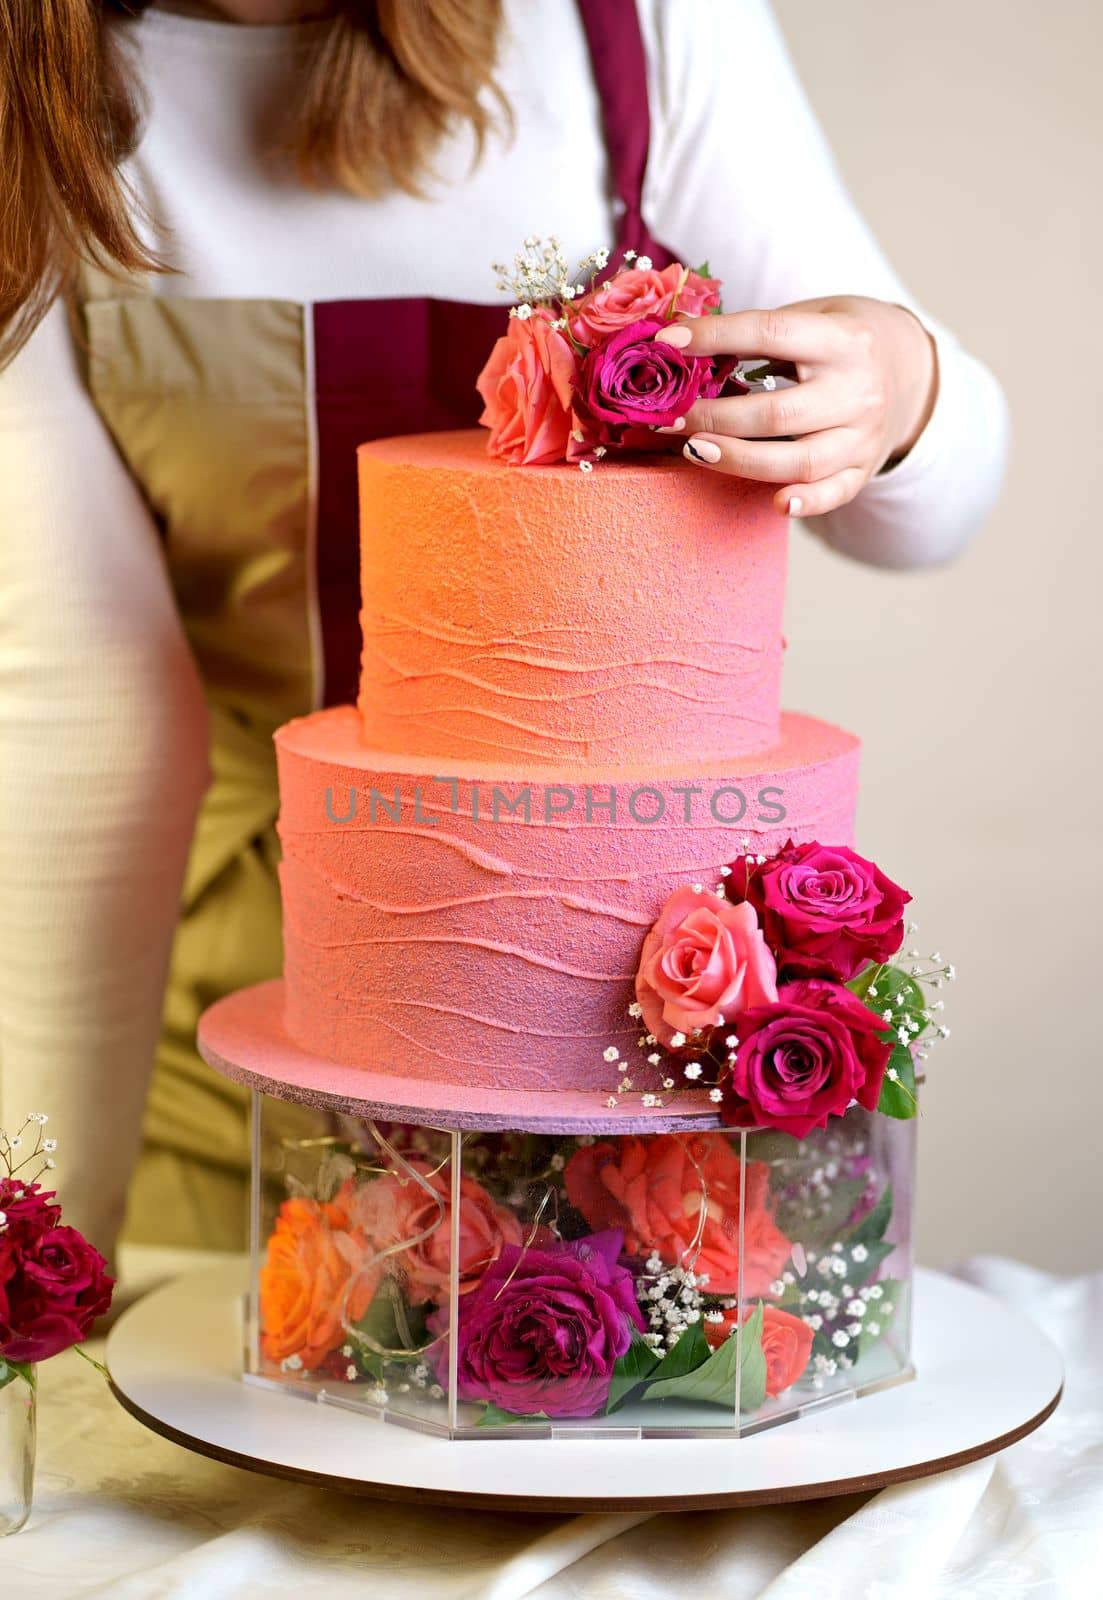 Confectioner in a working apron decorates a birthday cake with fresh flowers